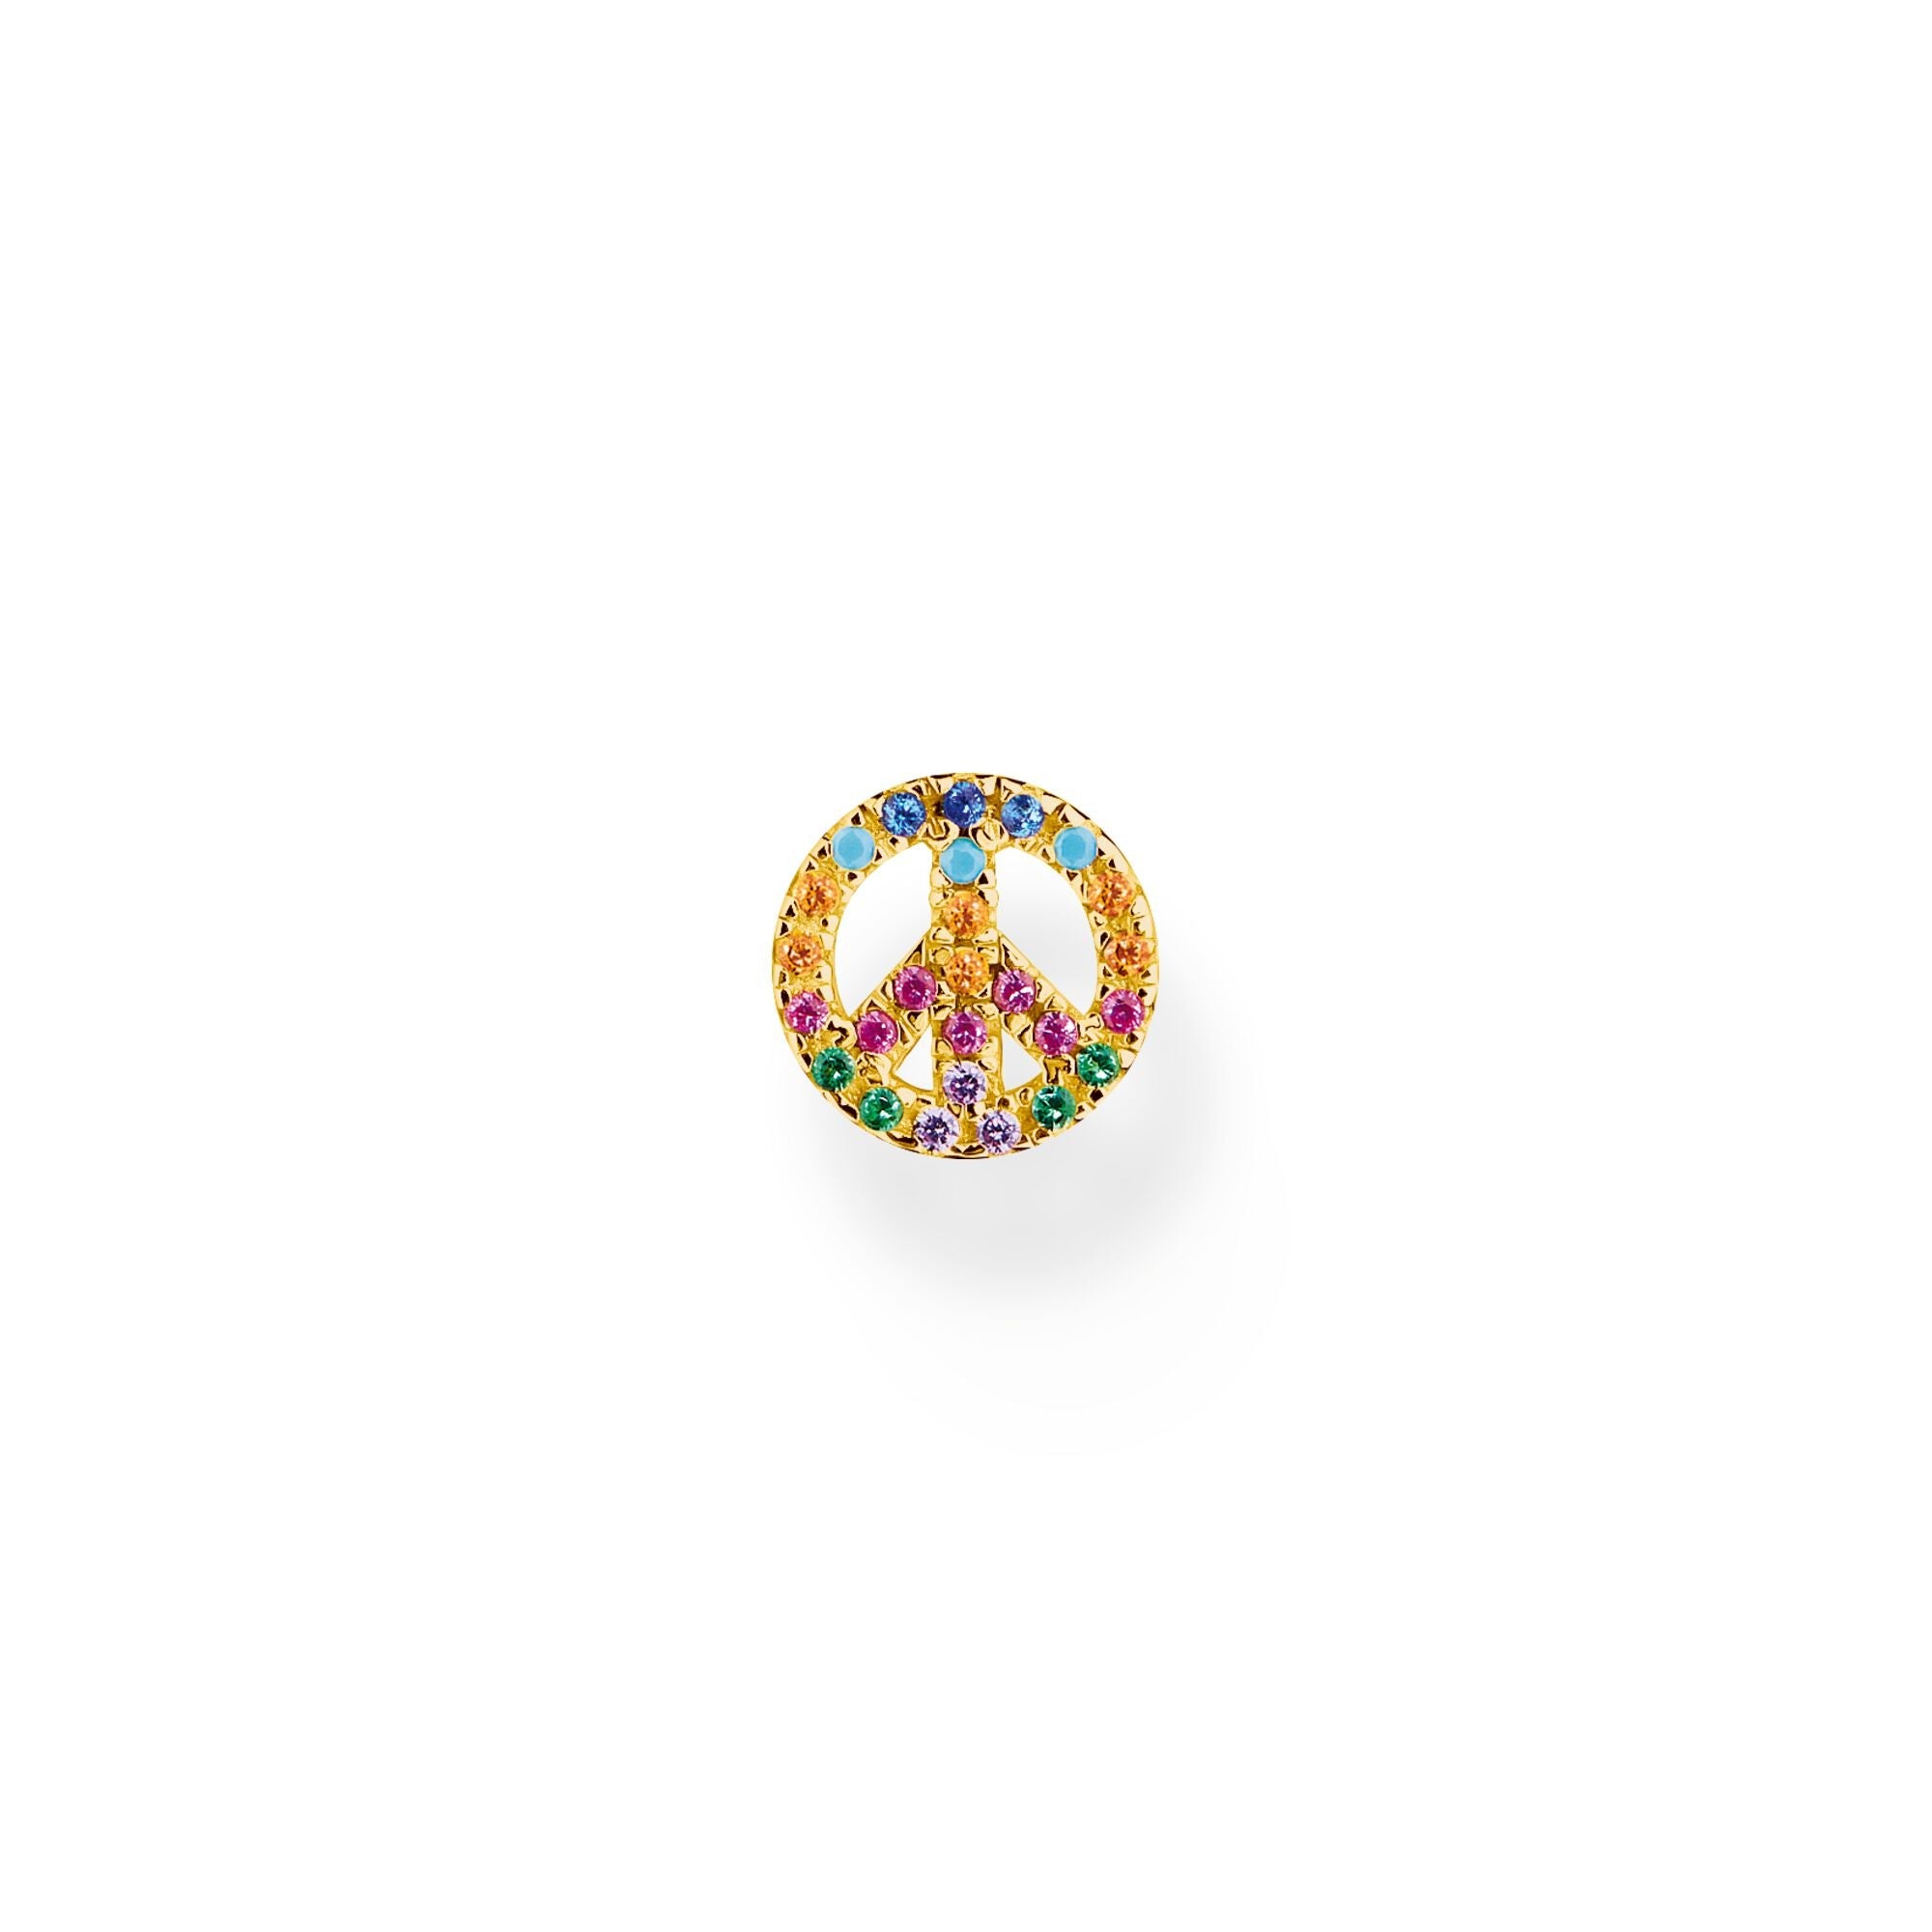 Thomas Sabo Charm Club Gold Plated Sterling Silver Colourful Peace Single Stud Earring